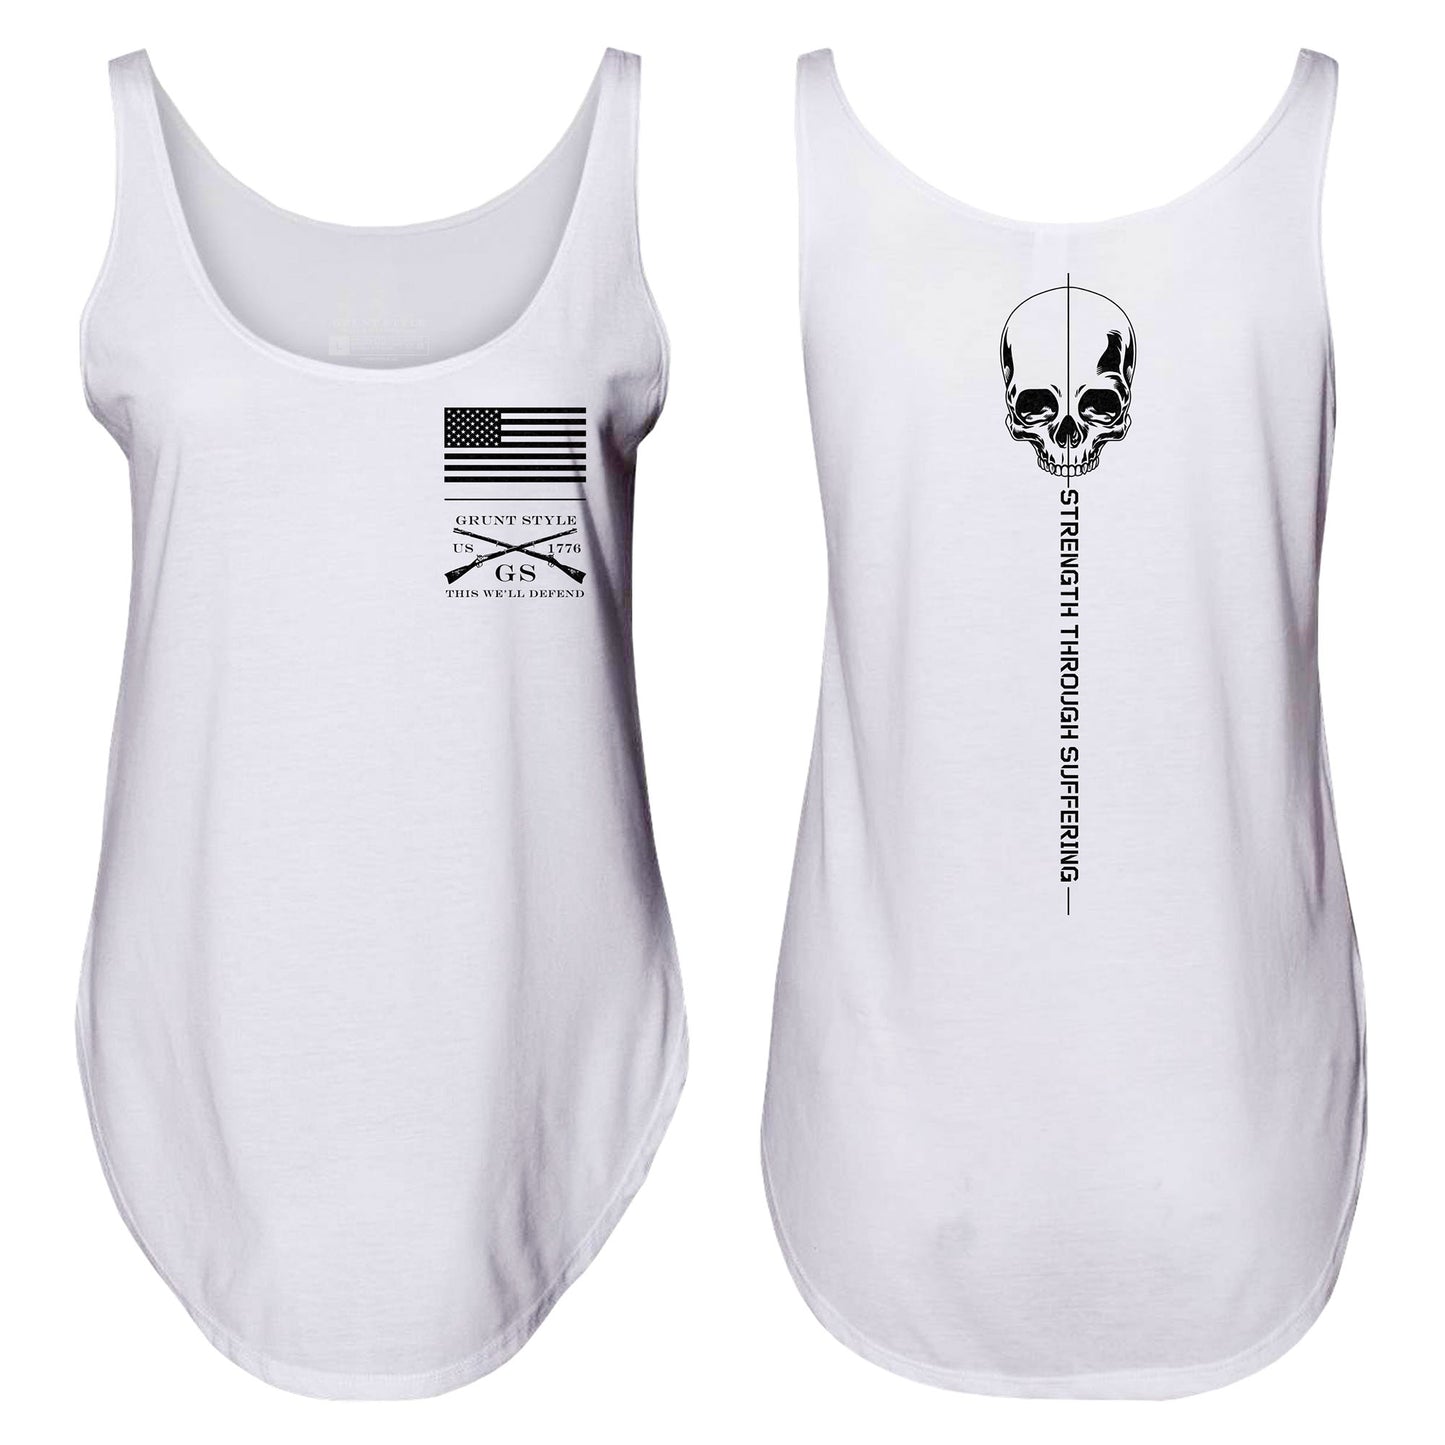 Patriotic Tank Top - Work Out Shirts for Women 